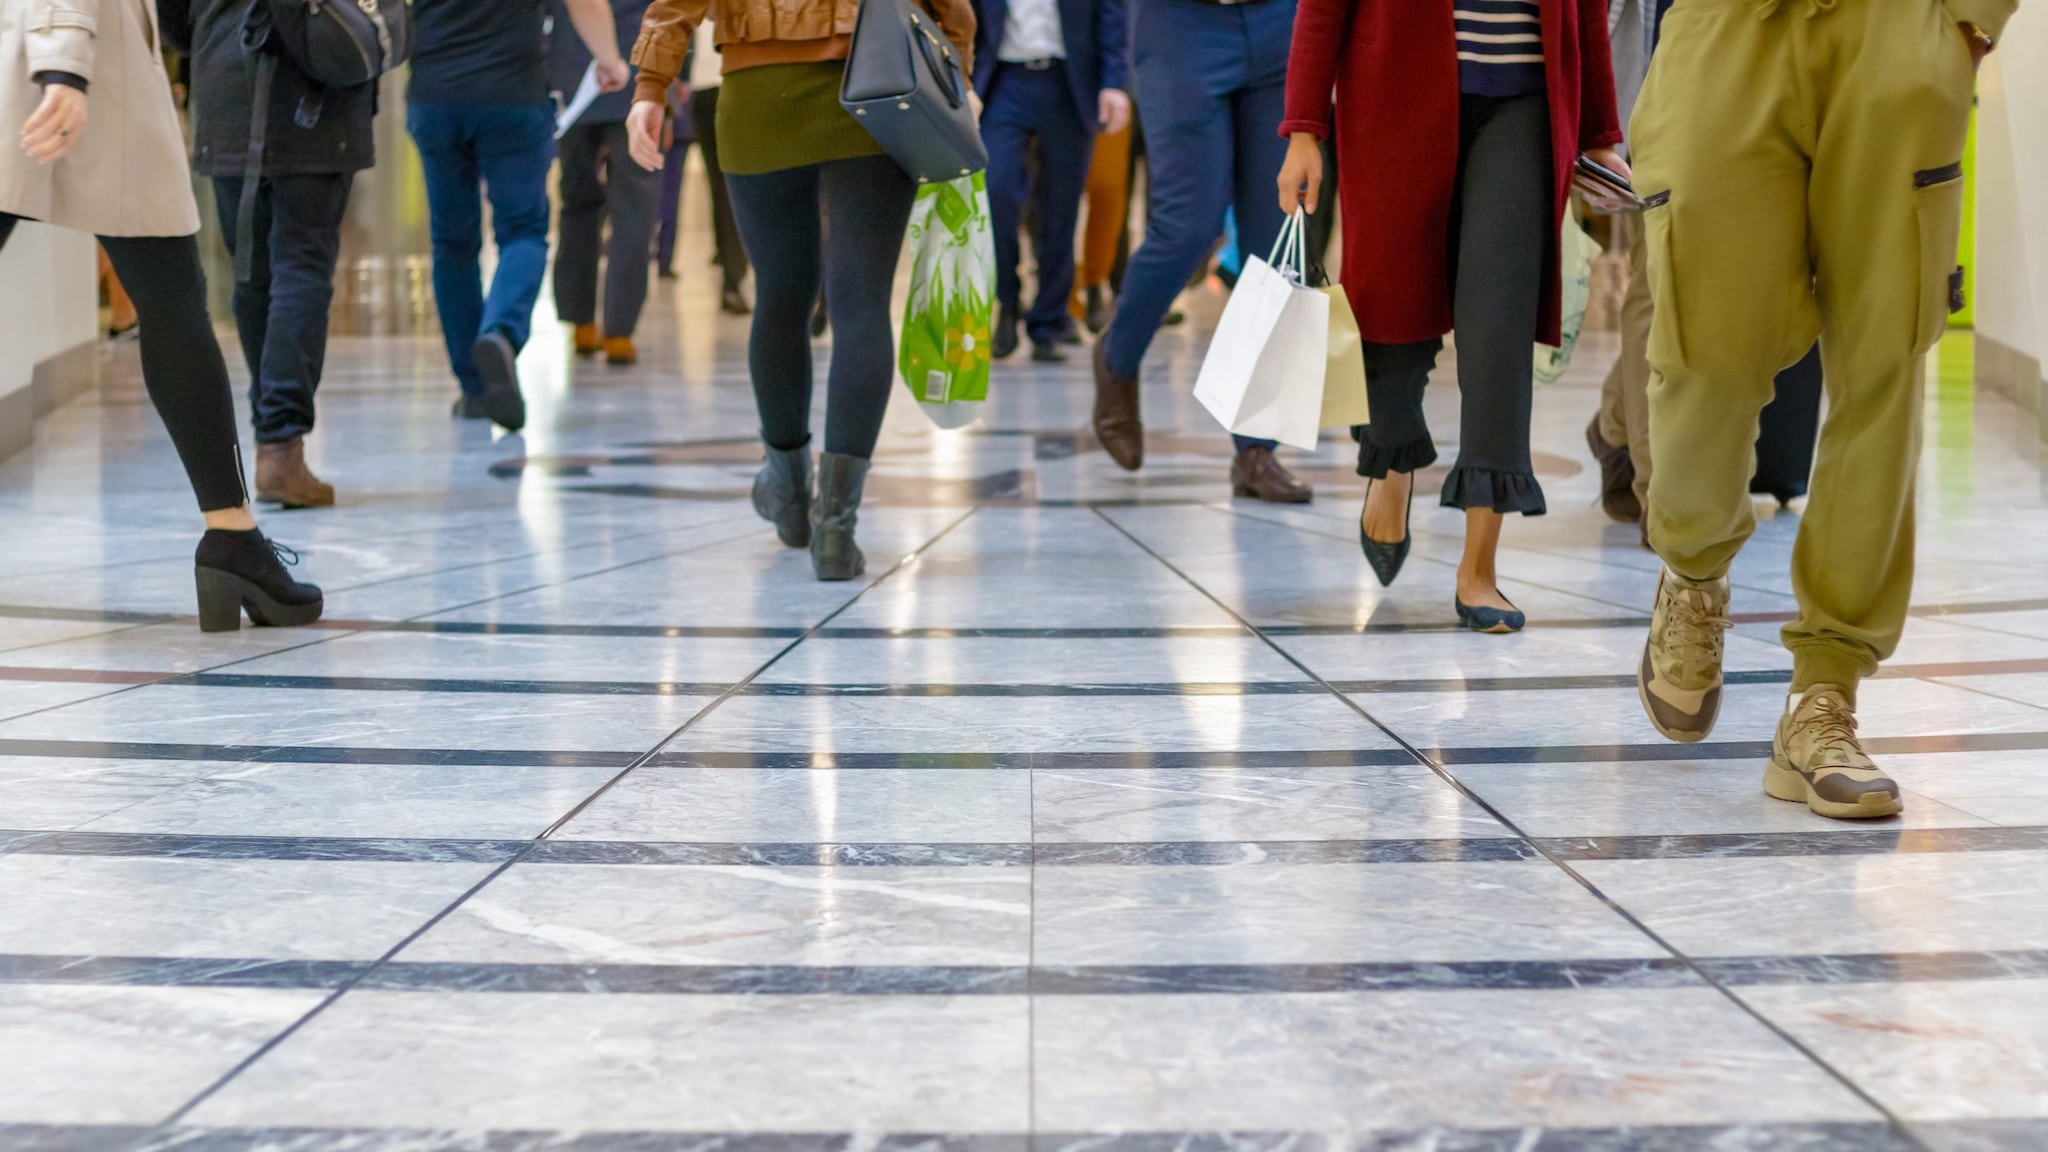 Photo of people's legs as they walk in an indoor shopping mall.